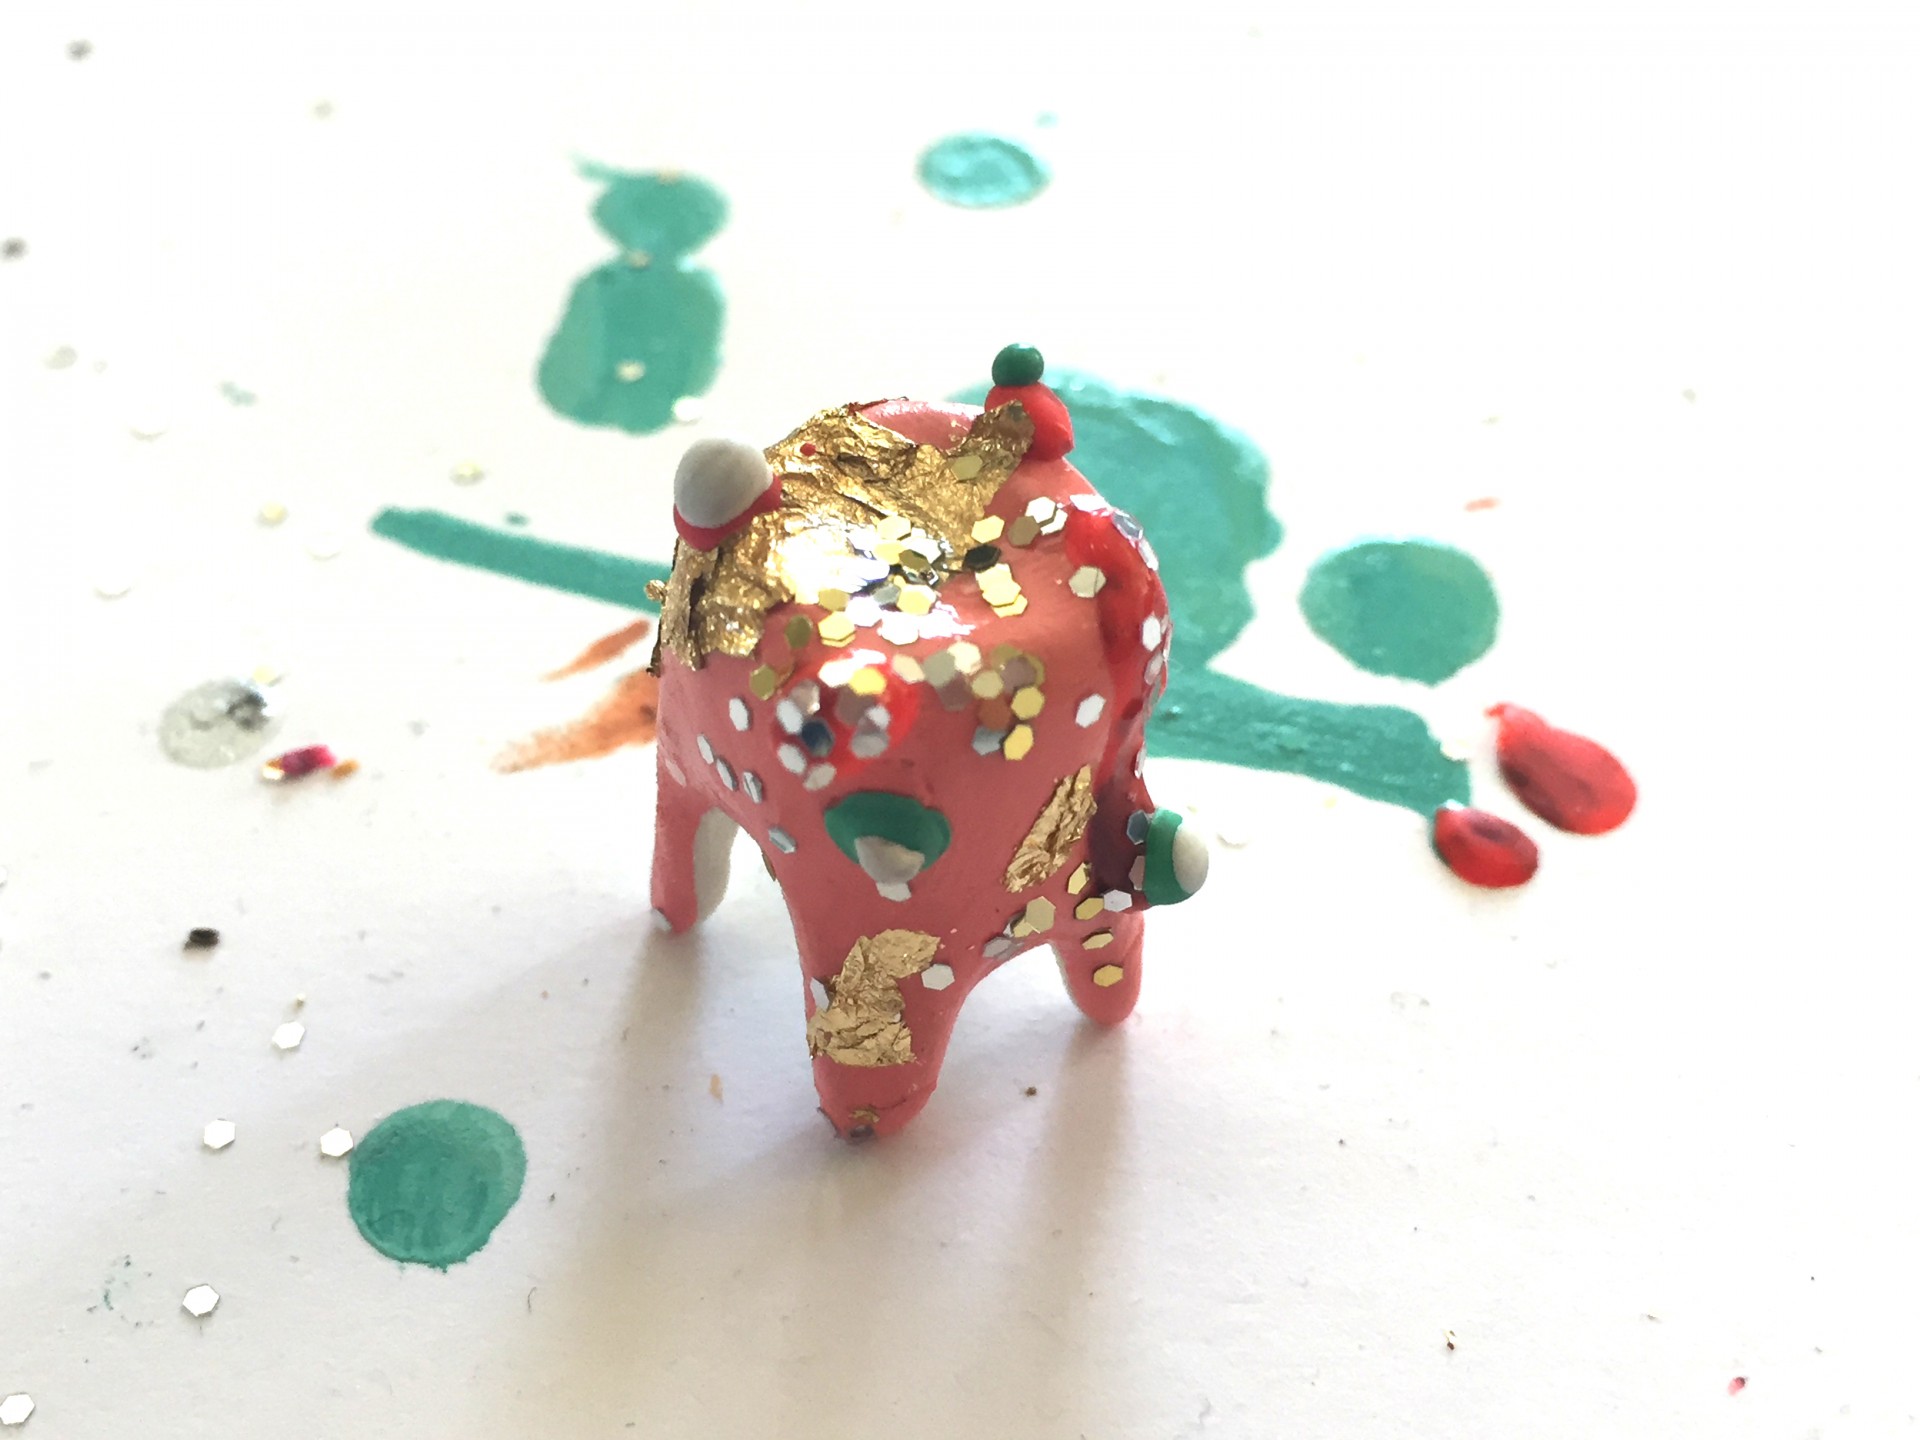 Single clay tooth covered in pink paint pen, colorful wax droplets and gold glitter. 